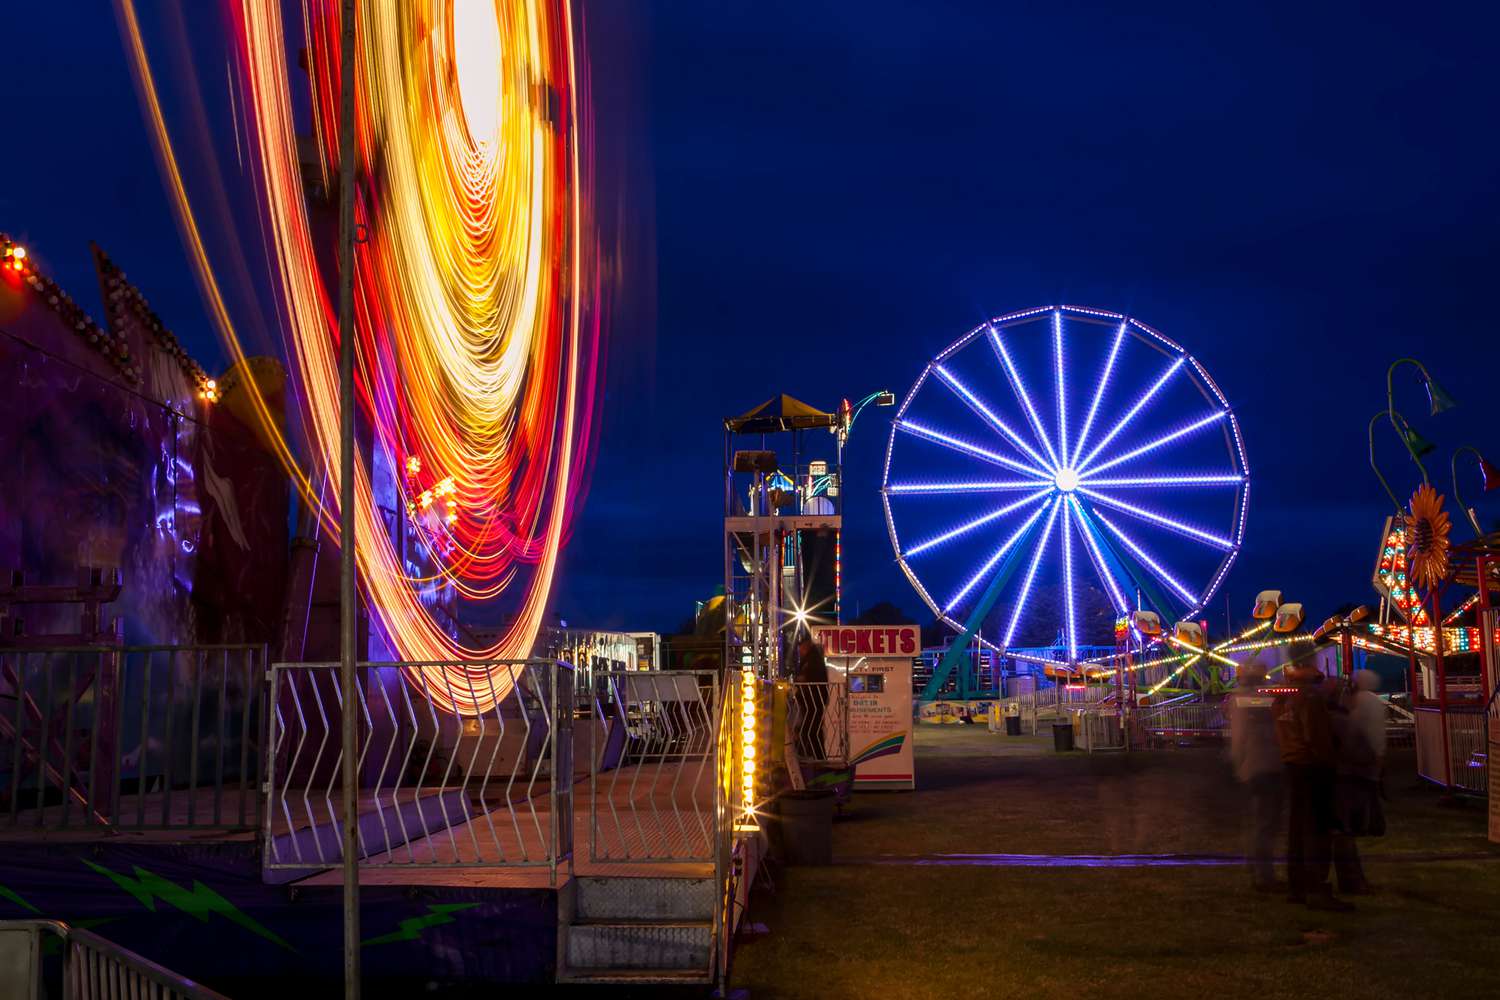 6 Injured After Carnival Ride ‘Tipped Over’ During July 4th Celebration [Video]